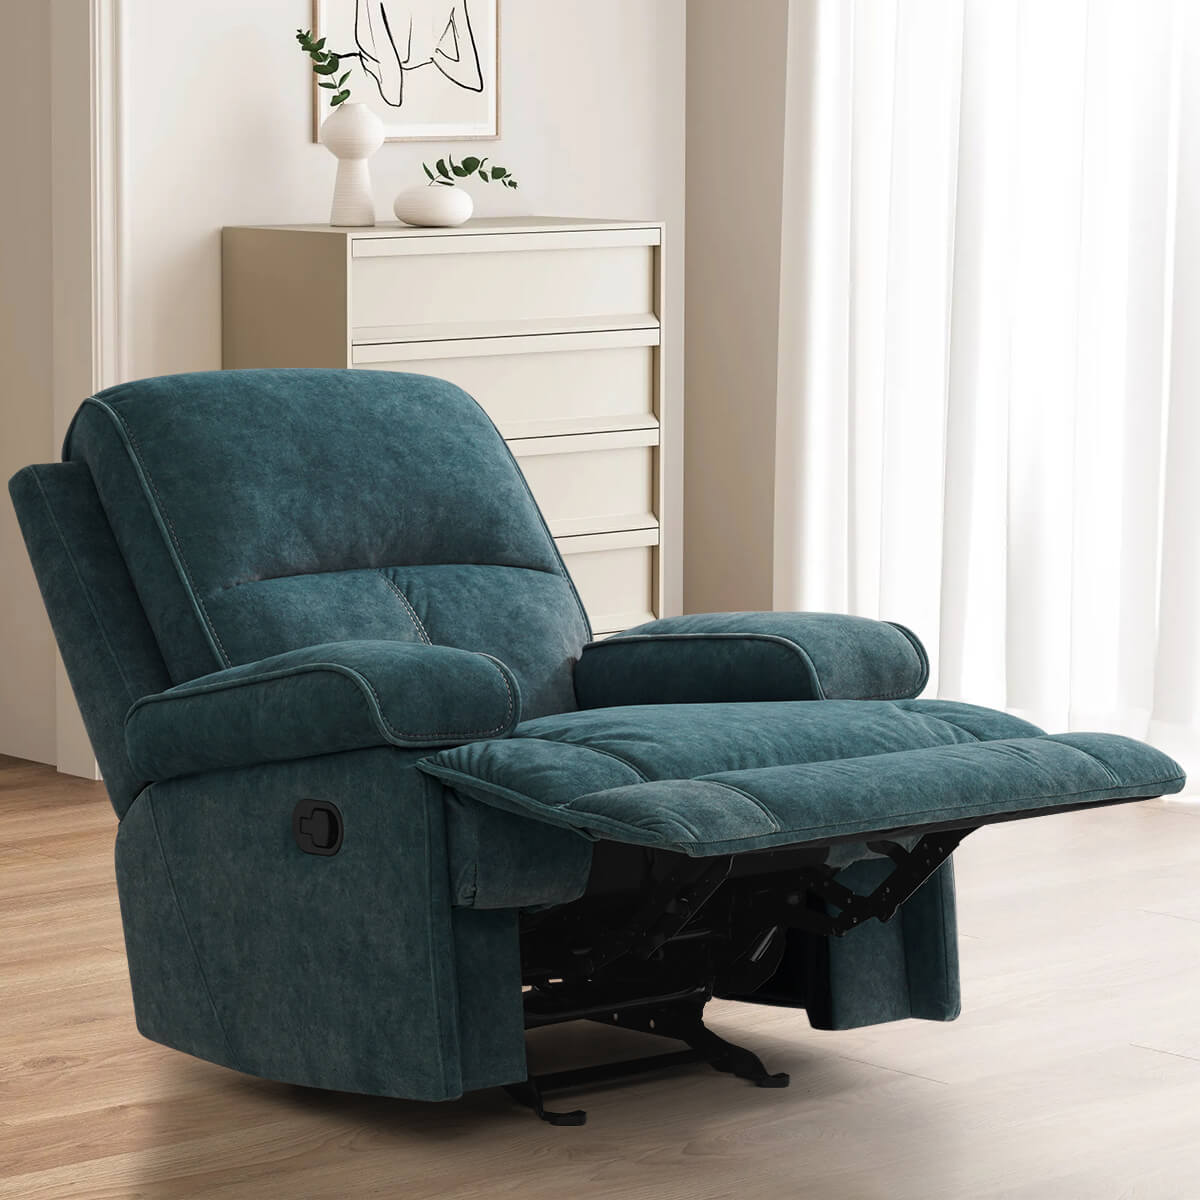 Manual Rocking Recliner Nursery Gliders, Breathable Fabric blue